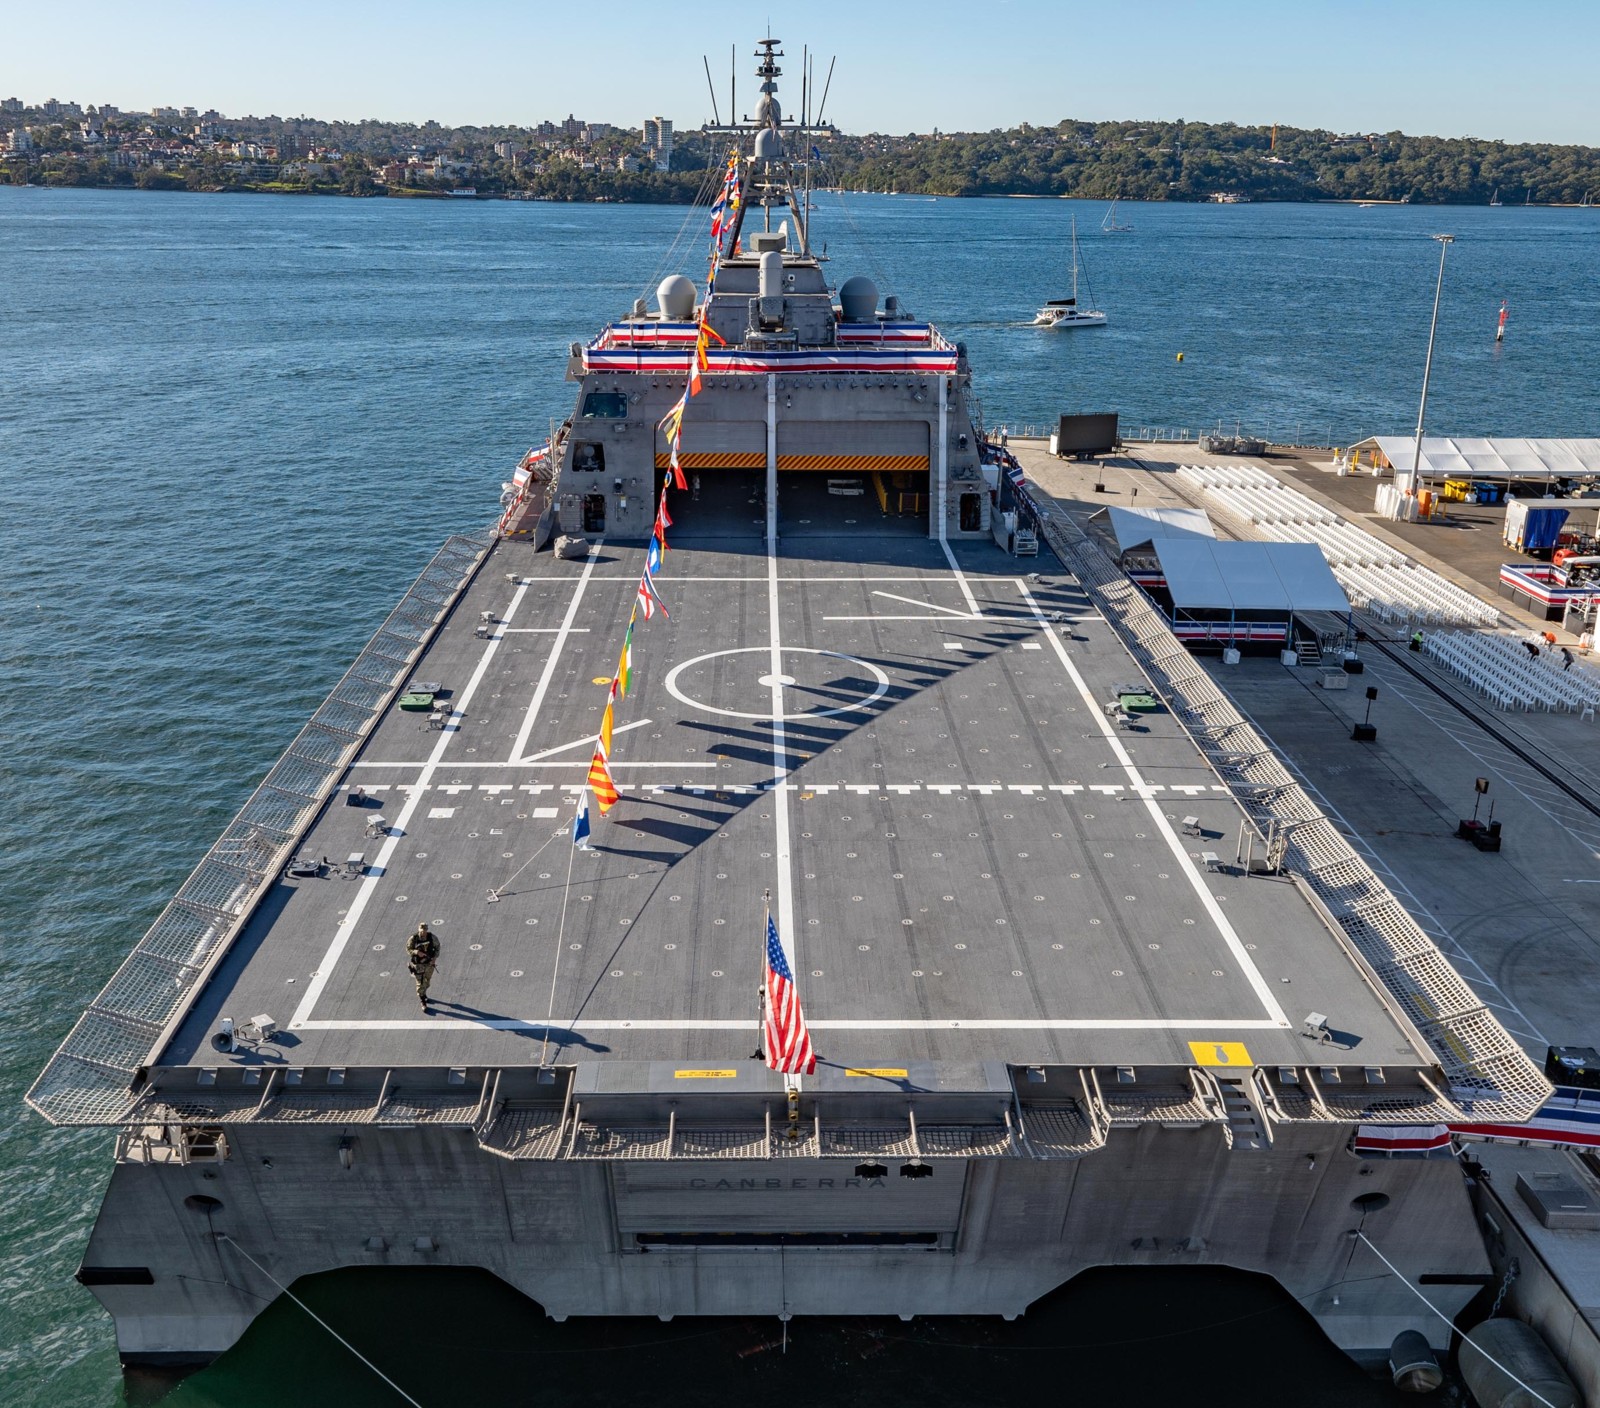 lcs-30 uss canberra littoral combat ship independence class us navy commissioning ceremony sydney 21